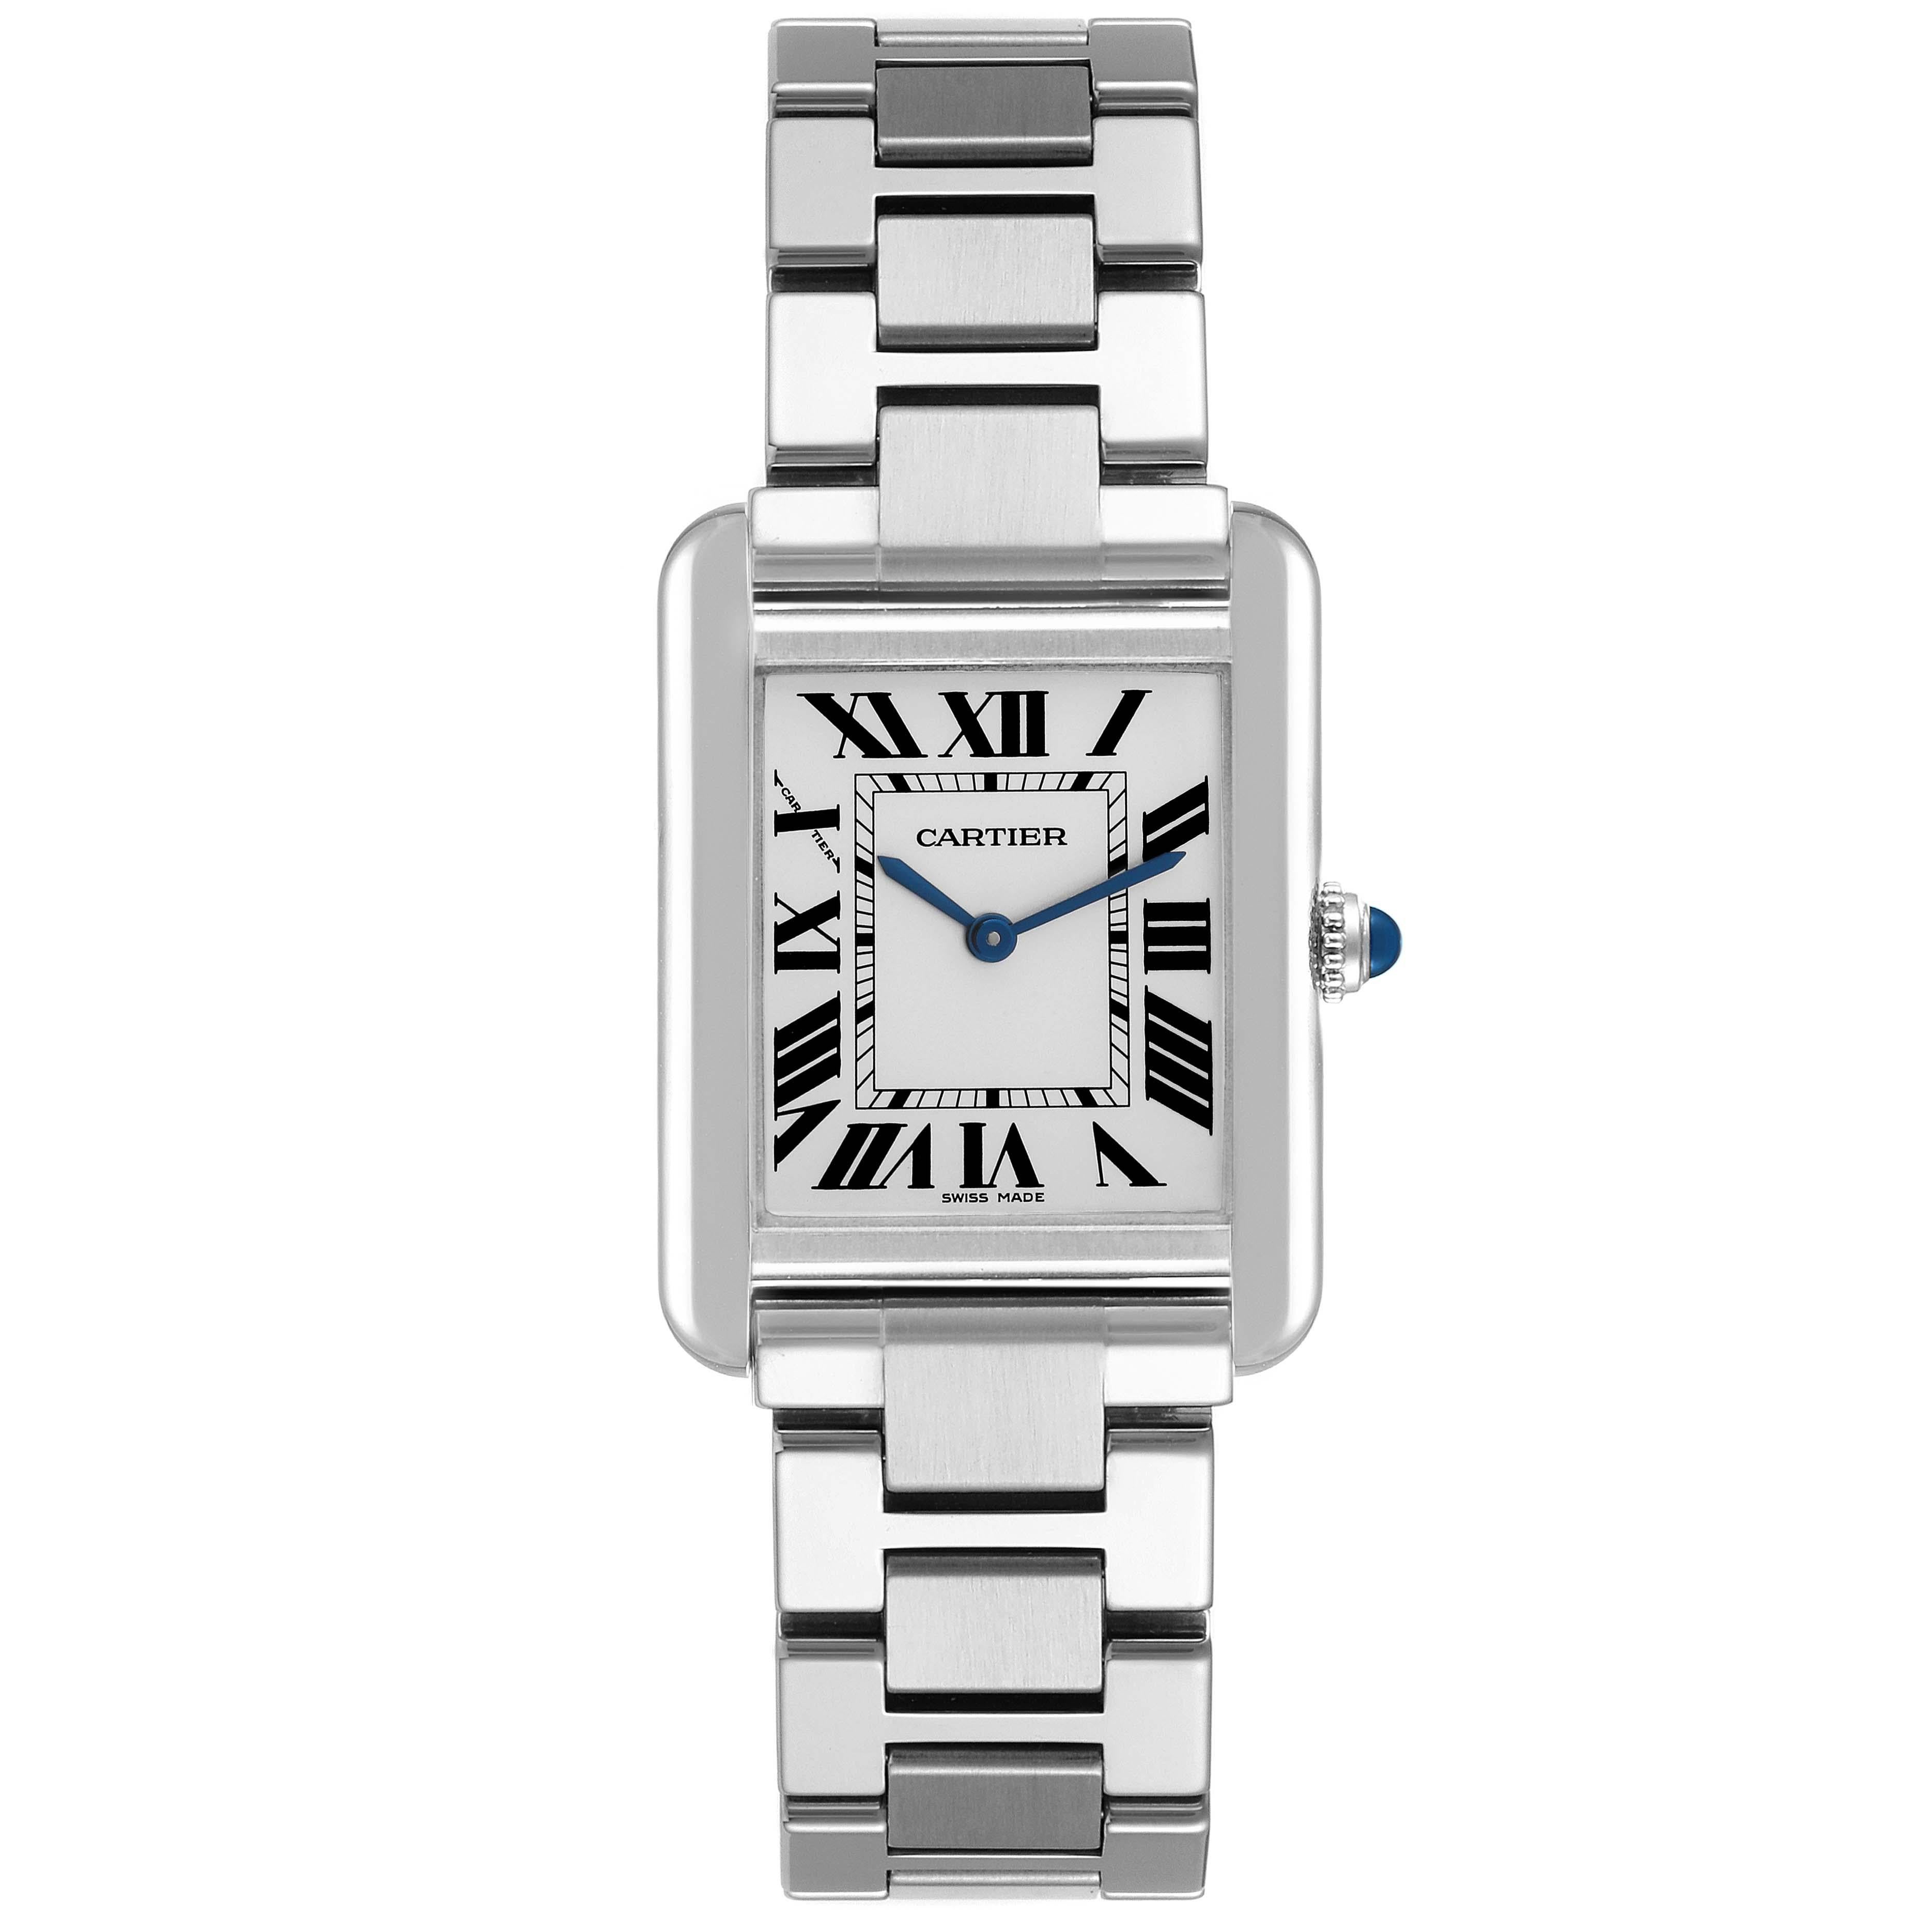 Cartier Tank Solo Small Silver Dial Steel Ladies Watch W5200013 Box Card. Quartz movement. Stainless steel case 31 x 24 mm. Circular grained crown set with a blue spinel cabochon. . Scratch resistant sapphire crystal. Silver opaline dial with black